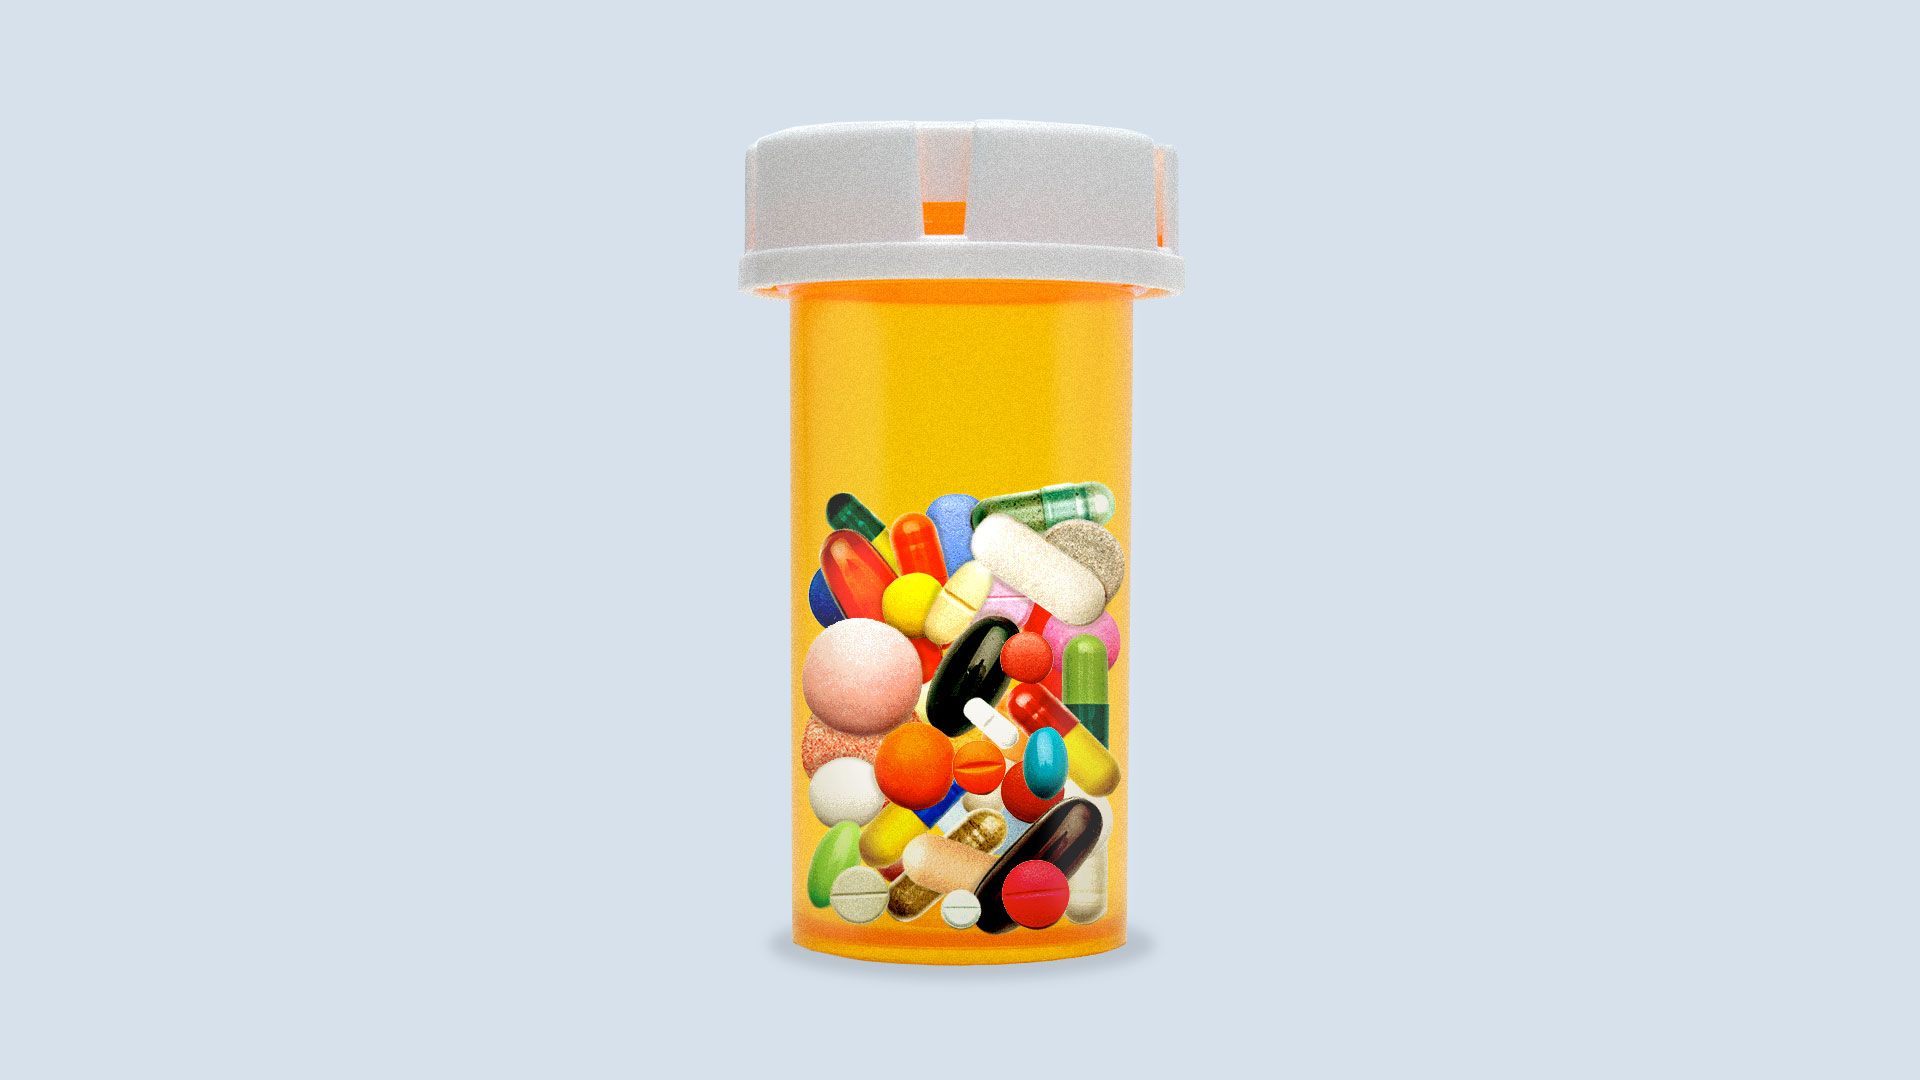 Illustration of a pill bottle full of pills that differ in shape and color.